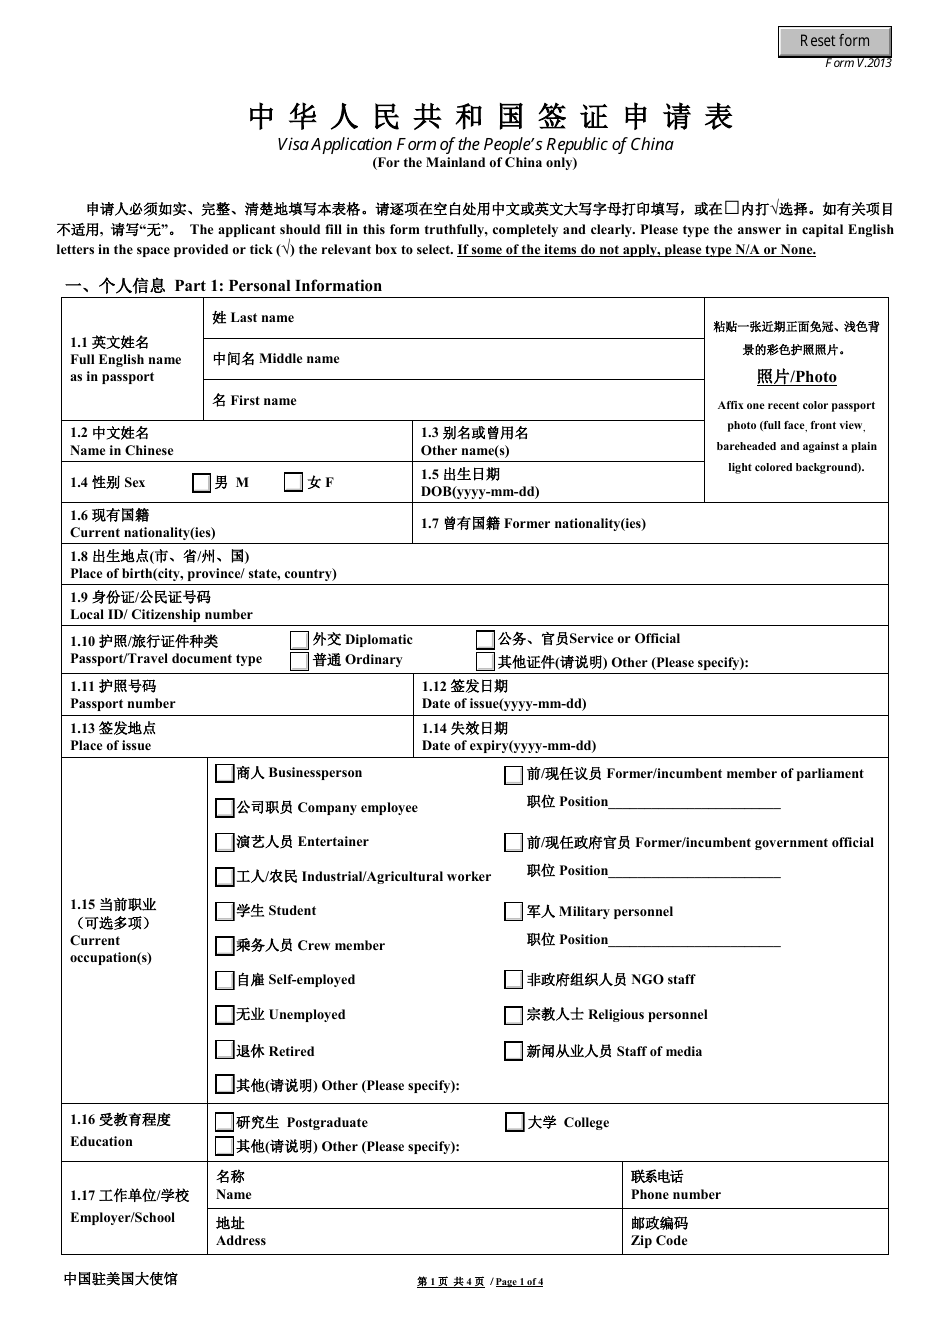 Chinese Visa Application Form - Embassy of the Peoples Republic of China - Washington, D.C., Page 1